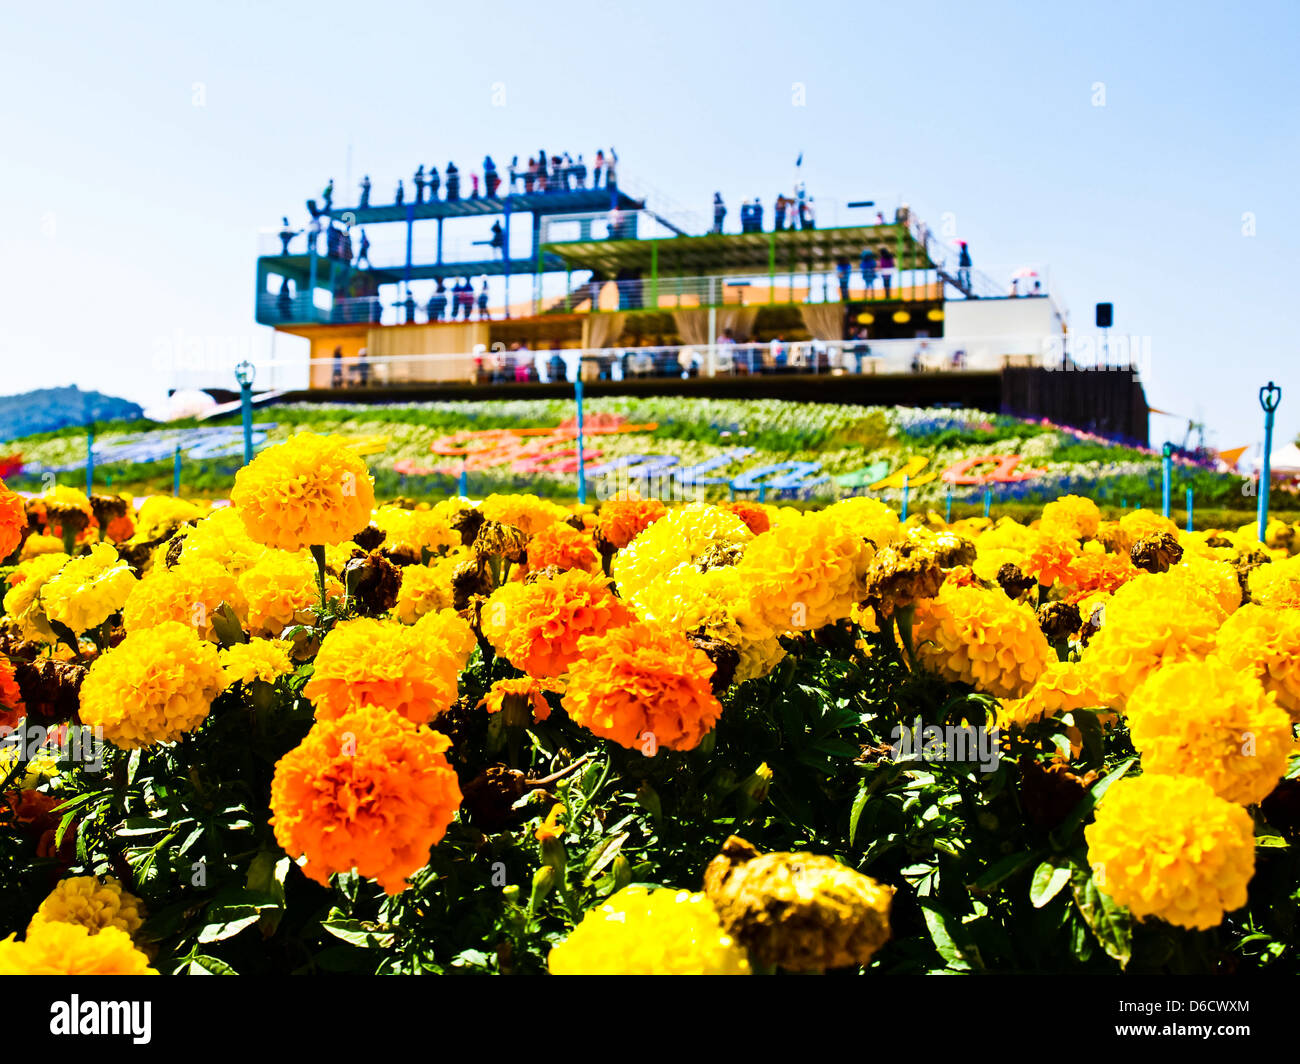 Marigold flower (Tagetes patula L.) garden with the building background Stock Photo